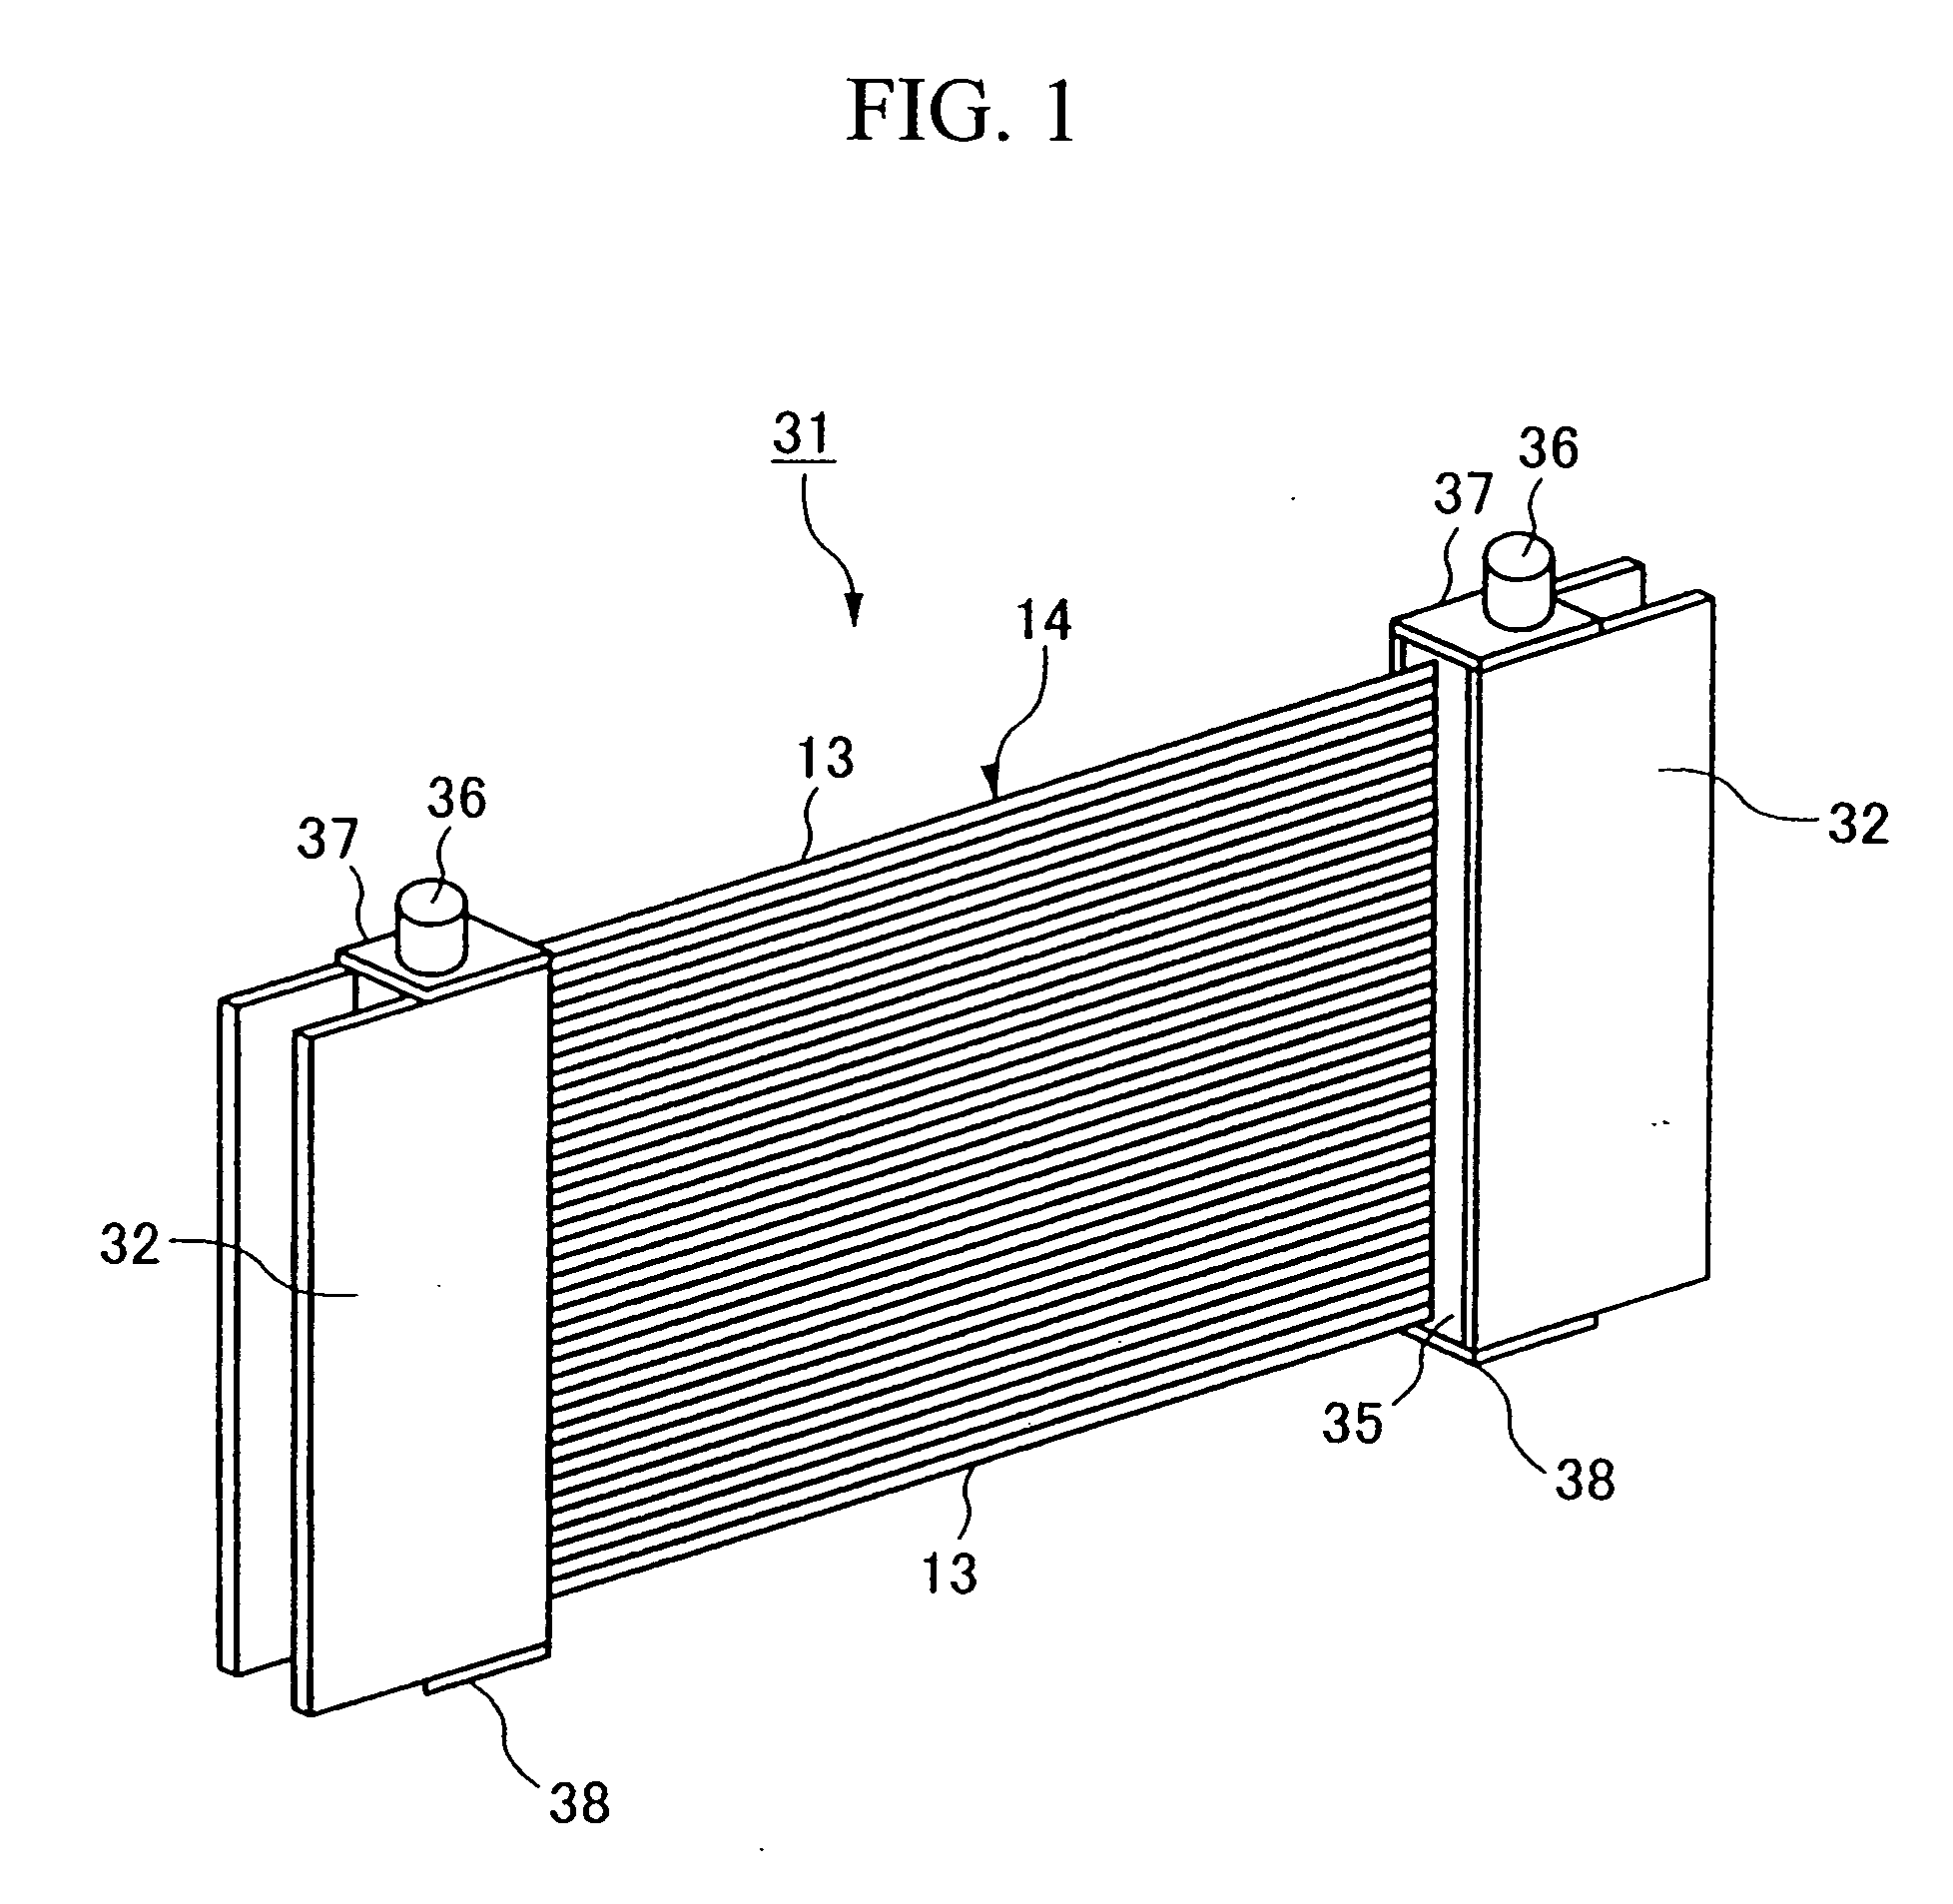 Hollow fiber membrane module, and a manufacturing method therefor, and housing for hollow fiber membrane module